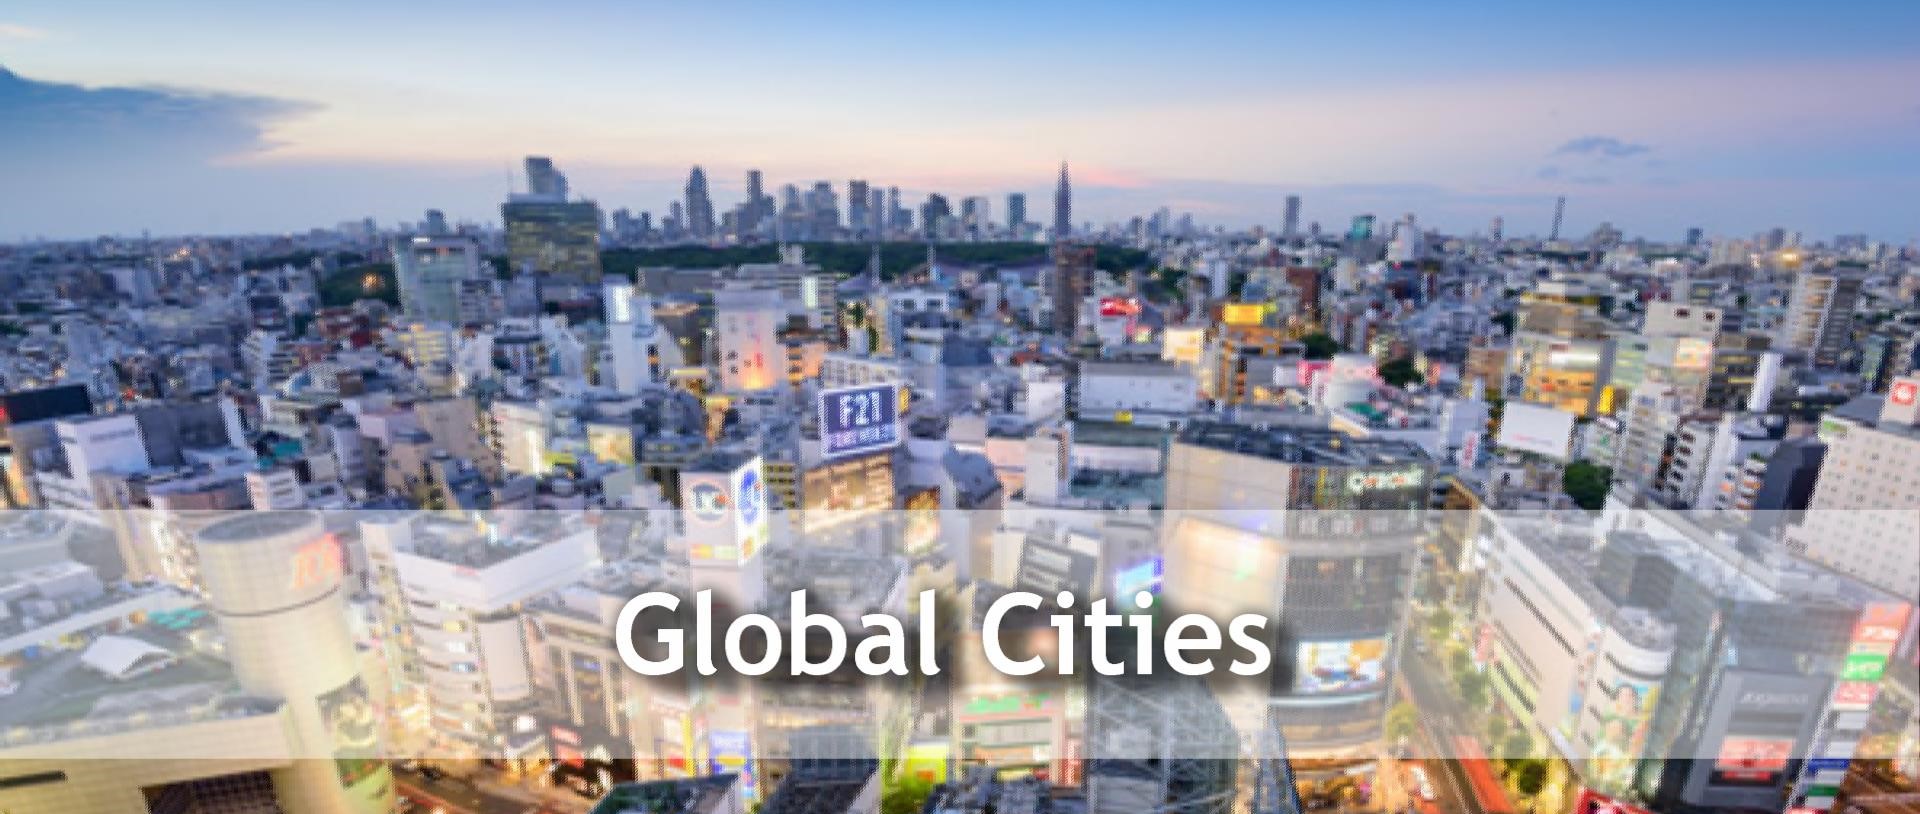 what is a global city? what are the characteristics of a global city?